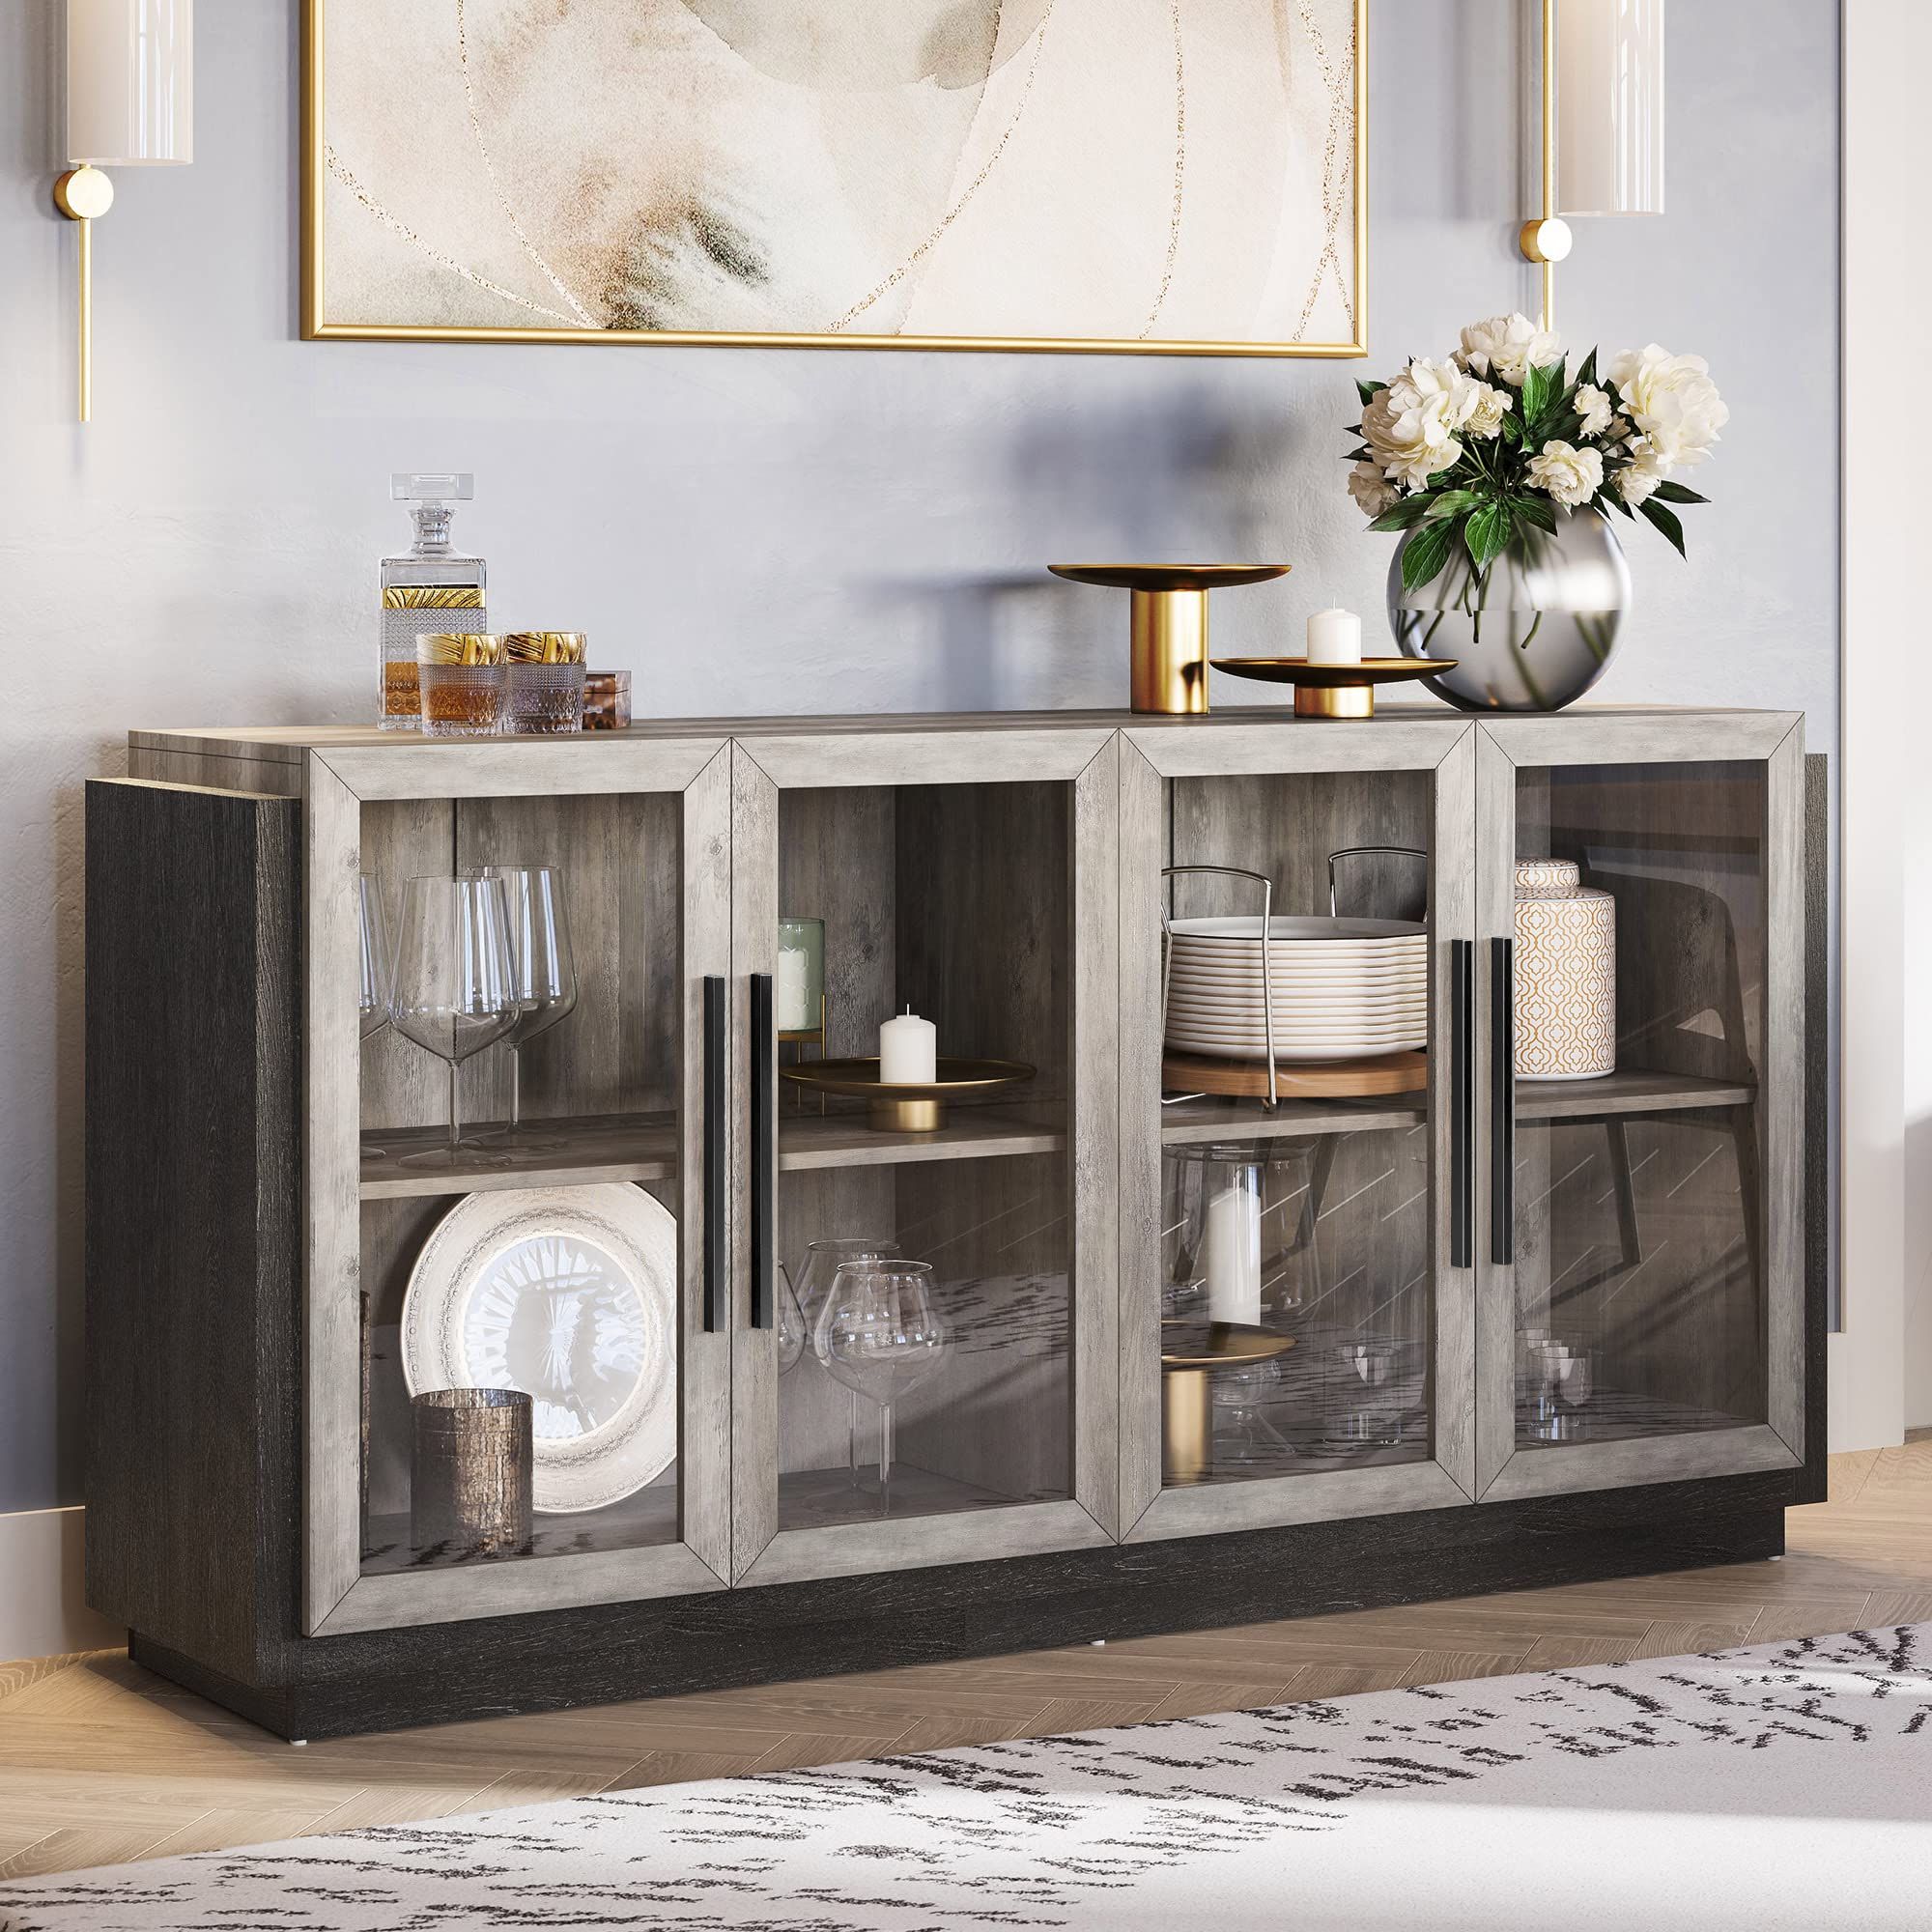 Sideboard Buffet Cabinets Throughout Favorite Amazon: Belleze Sideboard Buffet Cabinet, Modern Wood Glass  Buffet Sideboard With Storage, Console Table For Kitchen, Dining Room,  Living Room, Hallway, Or Entrance – Brixston (grey) : Home & Kitchen (Photo 2 of 10)